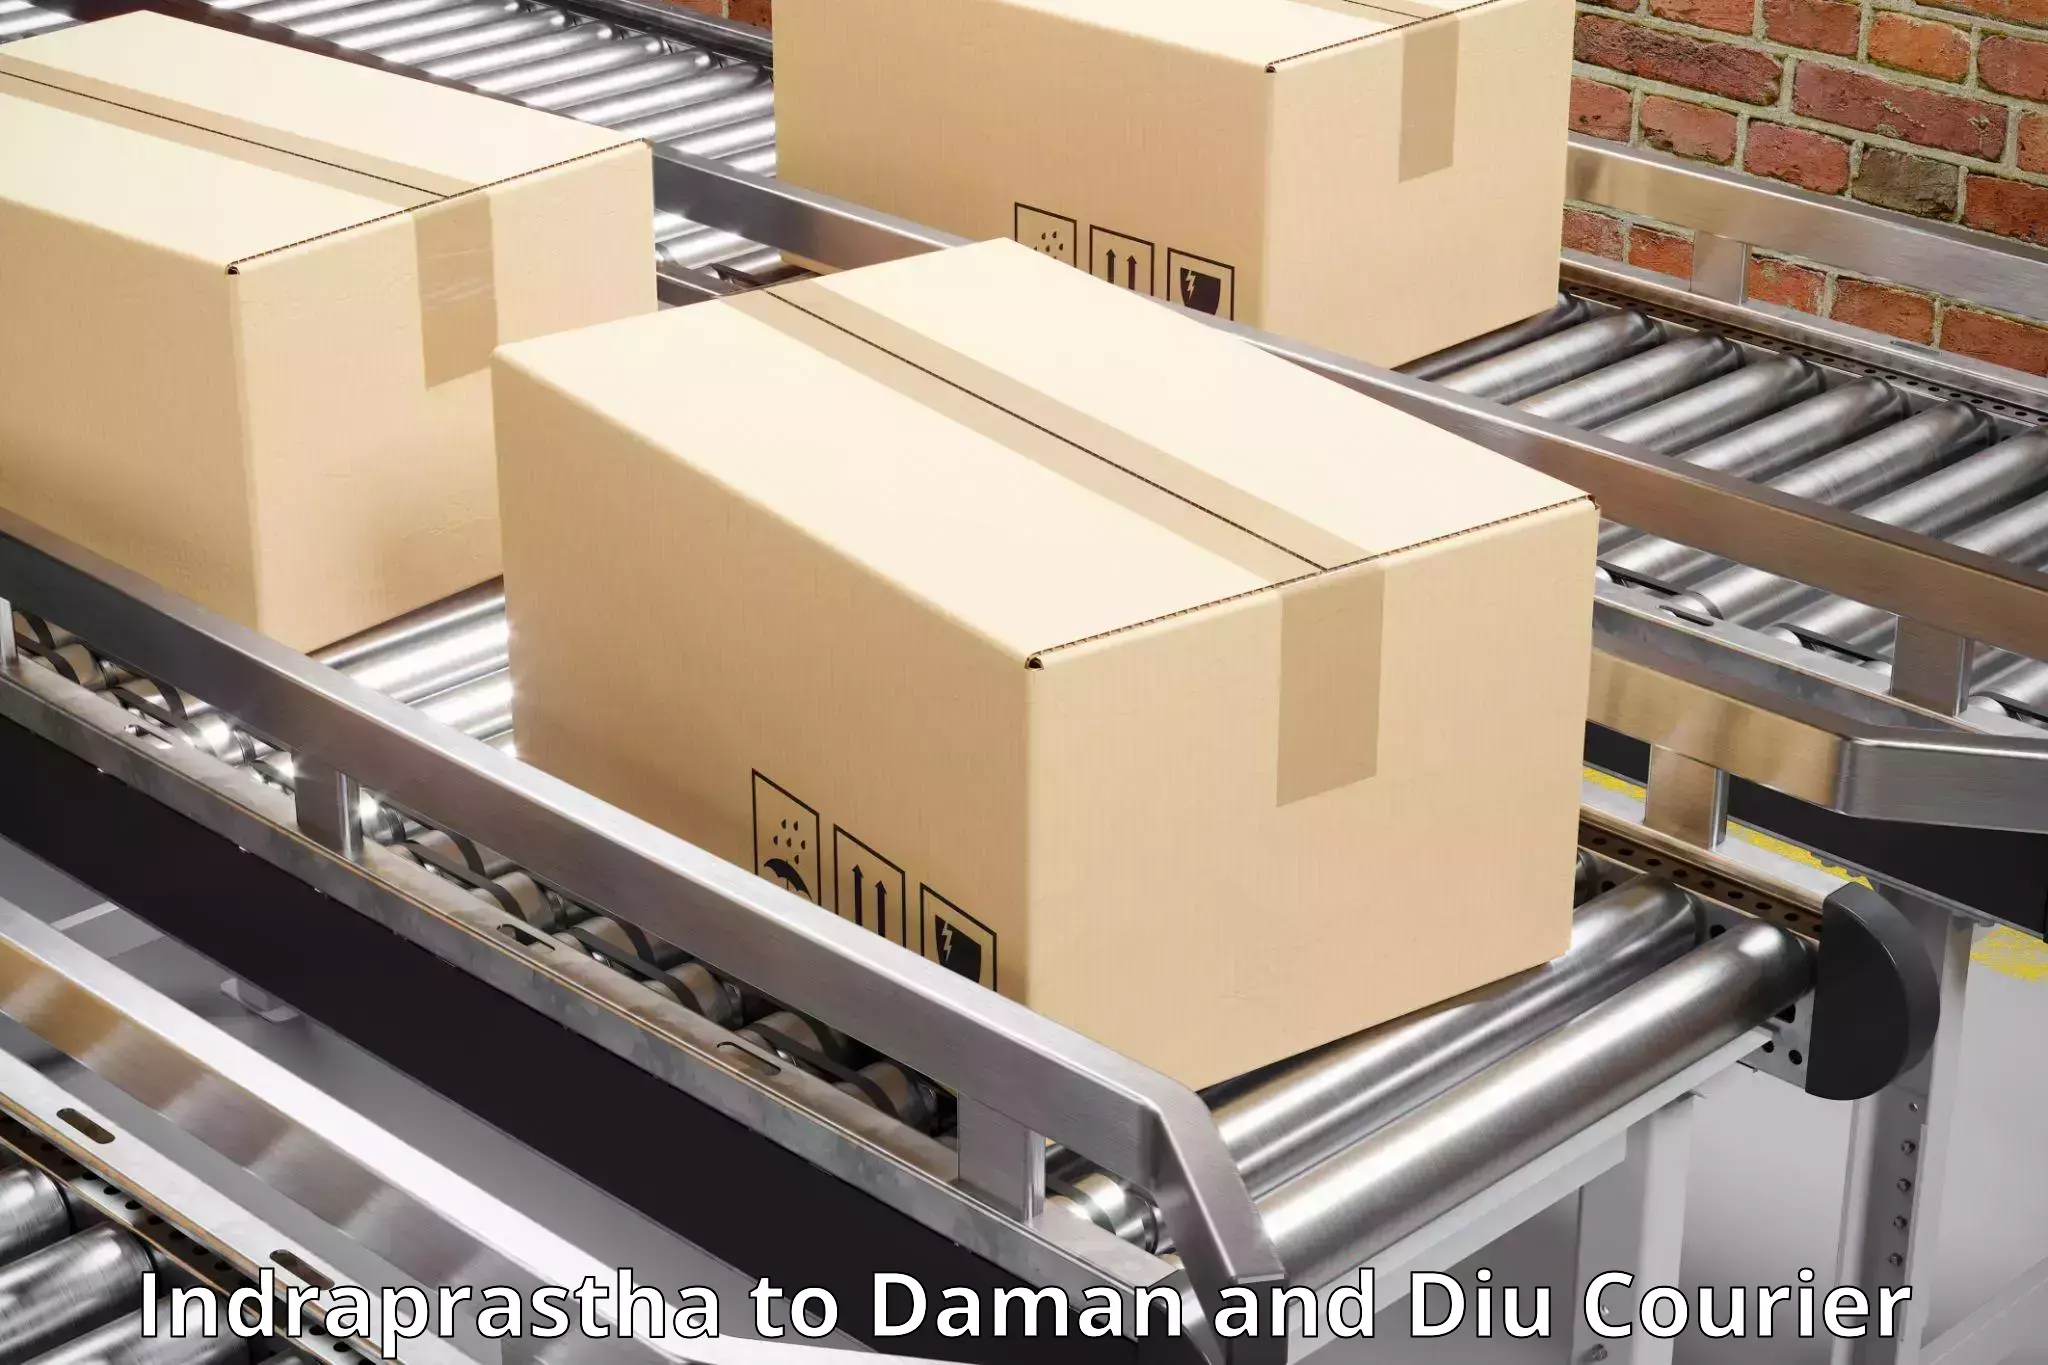 Automated shipping processes Indraprastha to Daman and Diu